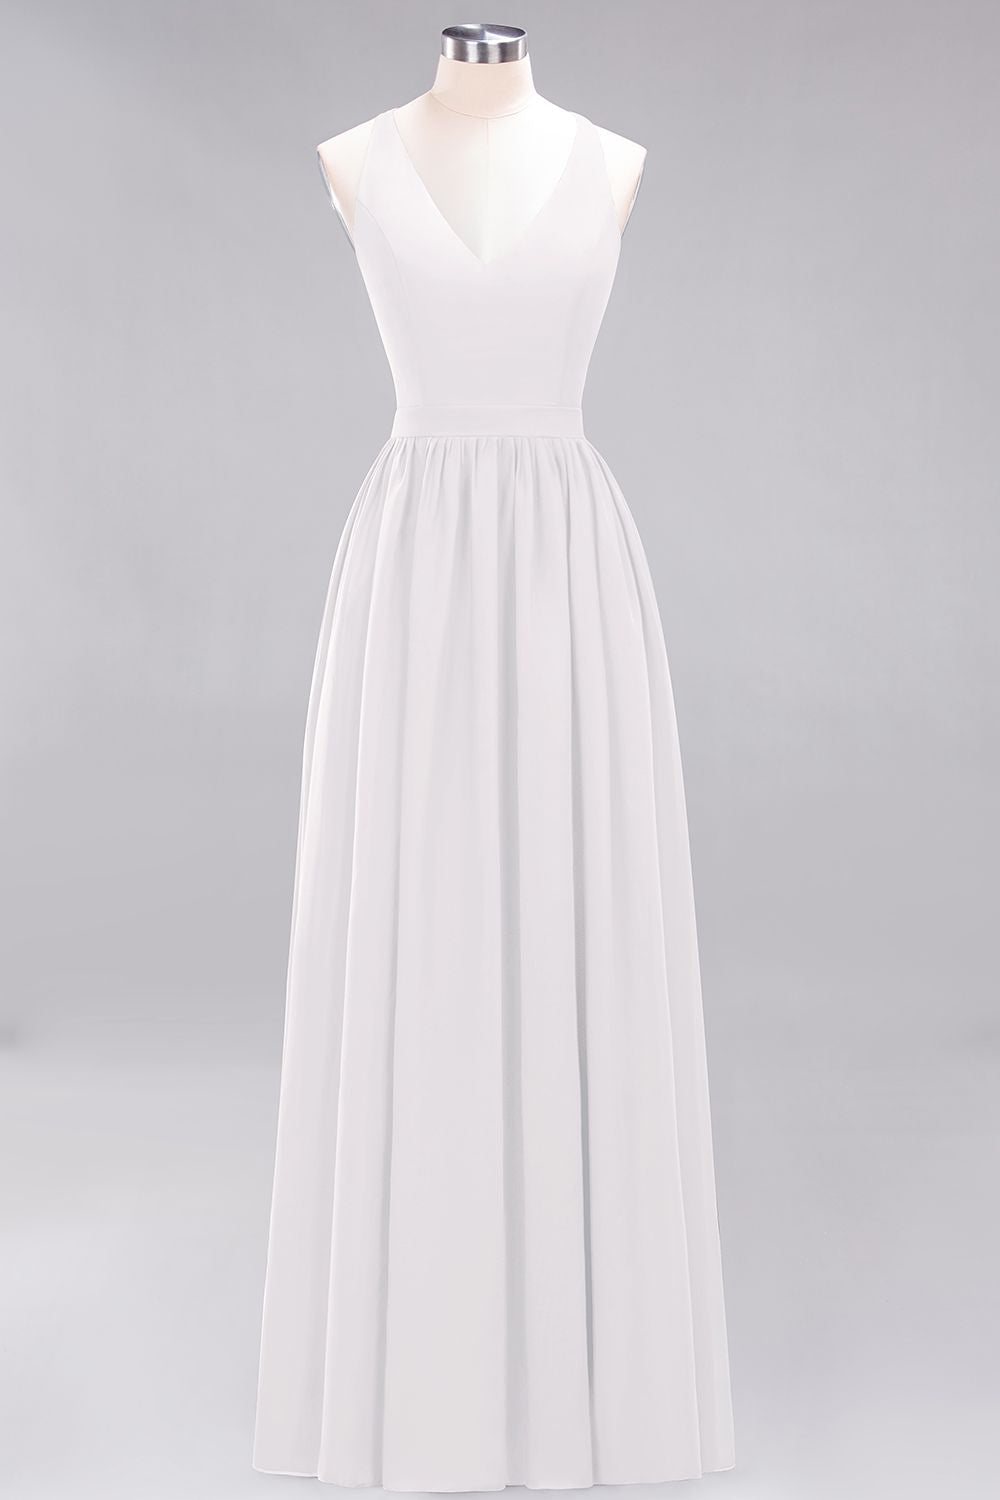 Load image into Gallery viewer, Affordable Chiffon V-Neck Sleeveless Lace Bridesmaid Dress Online-27dress
